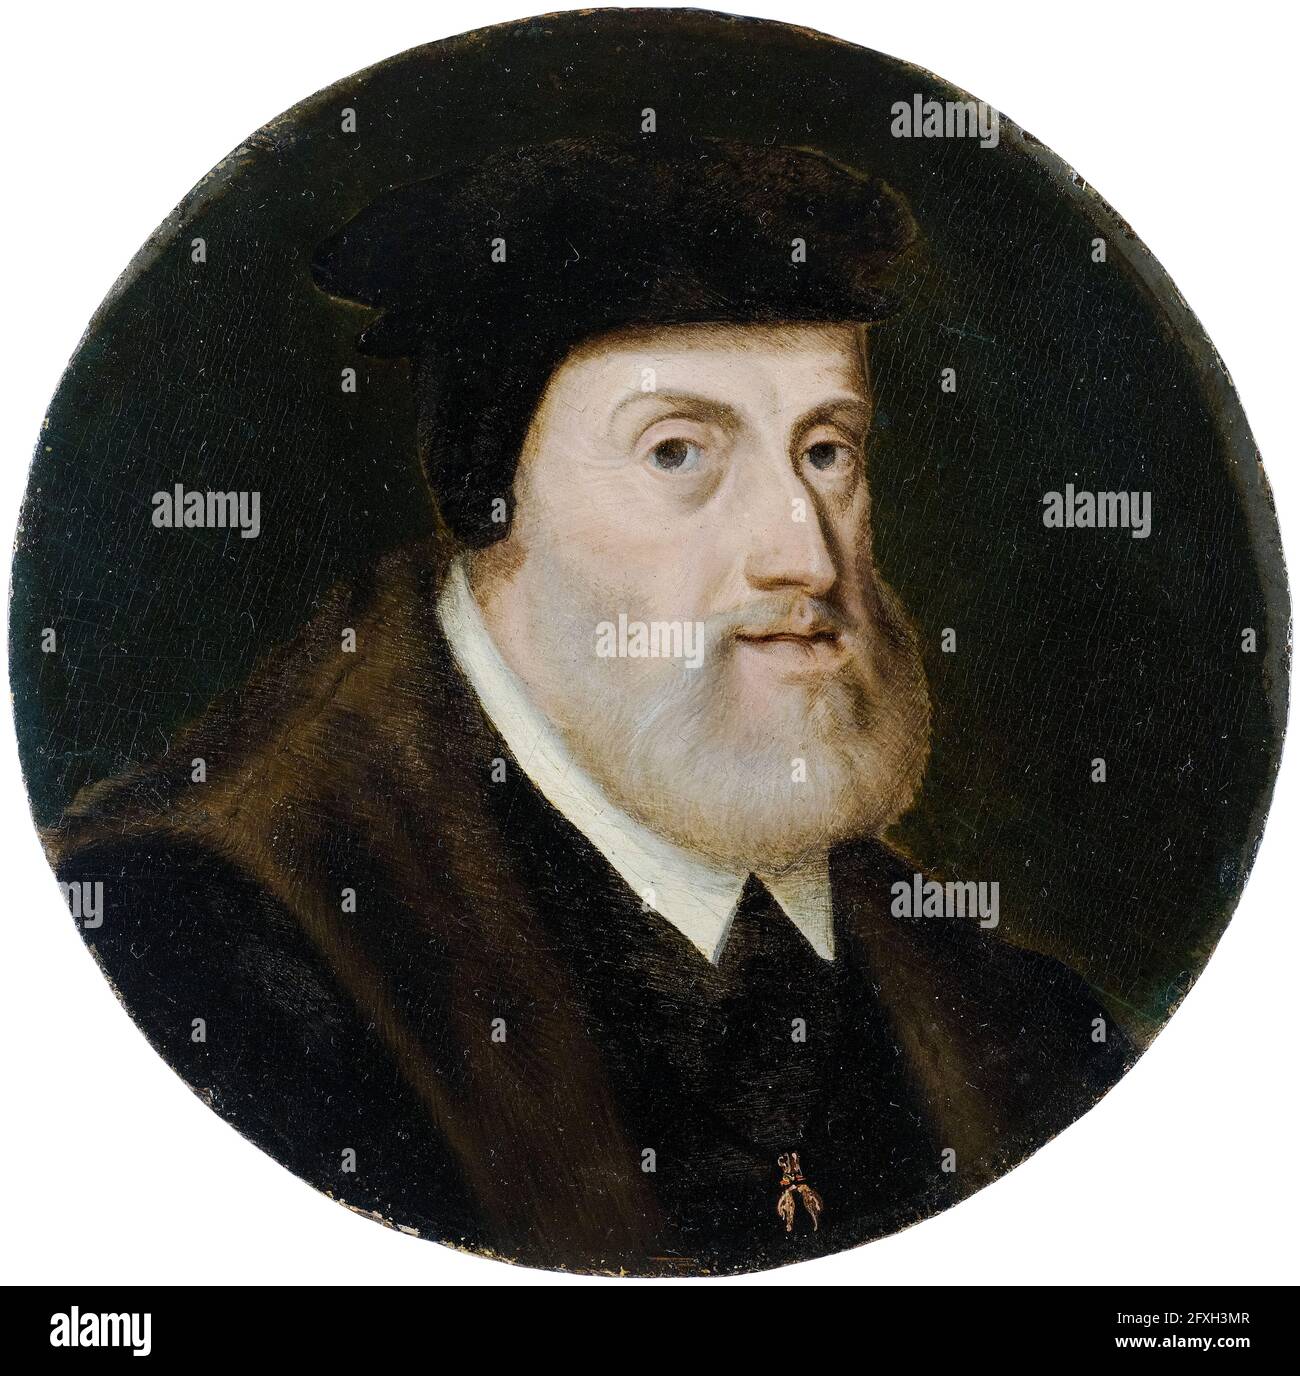 Charles V (1500-1558), Holy Roman Emperor 1519-1556, portrait painting in oil on panel, circa 1550 Stock Photo